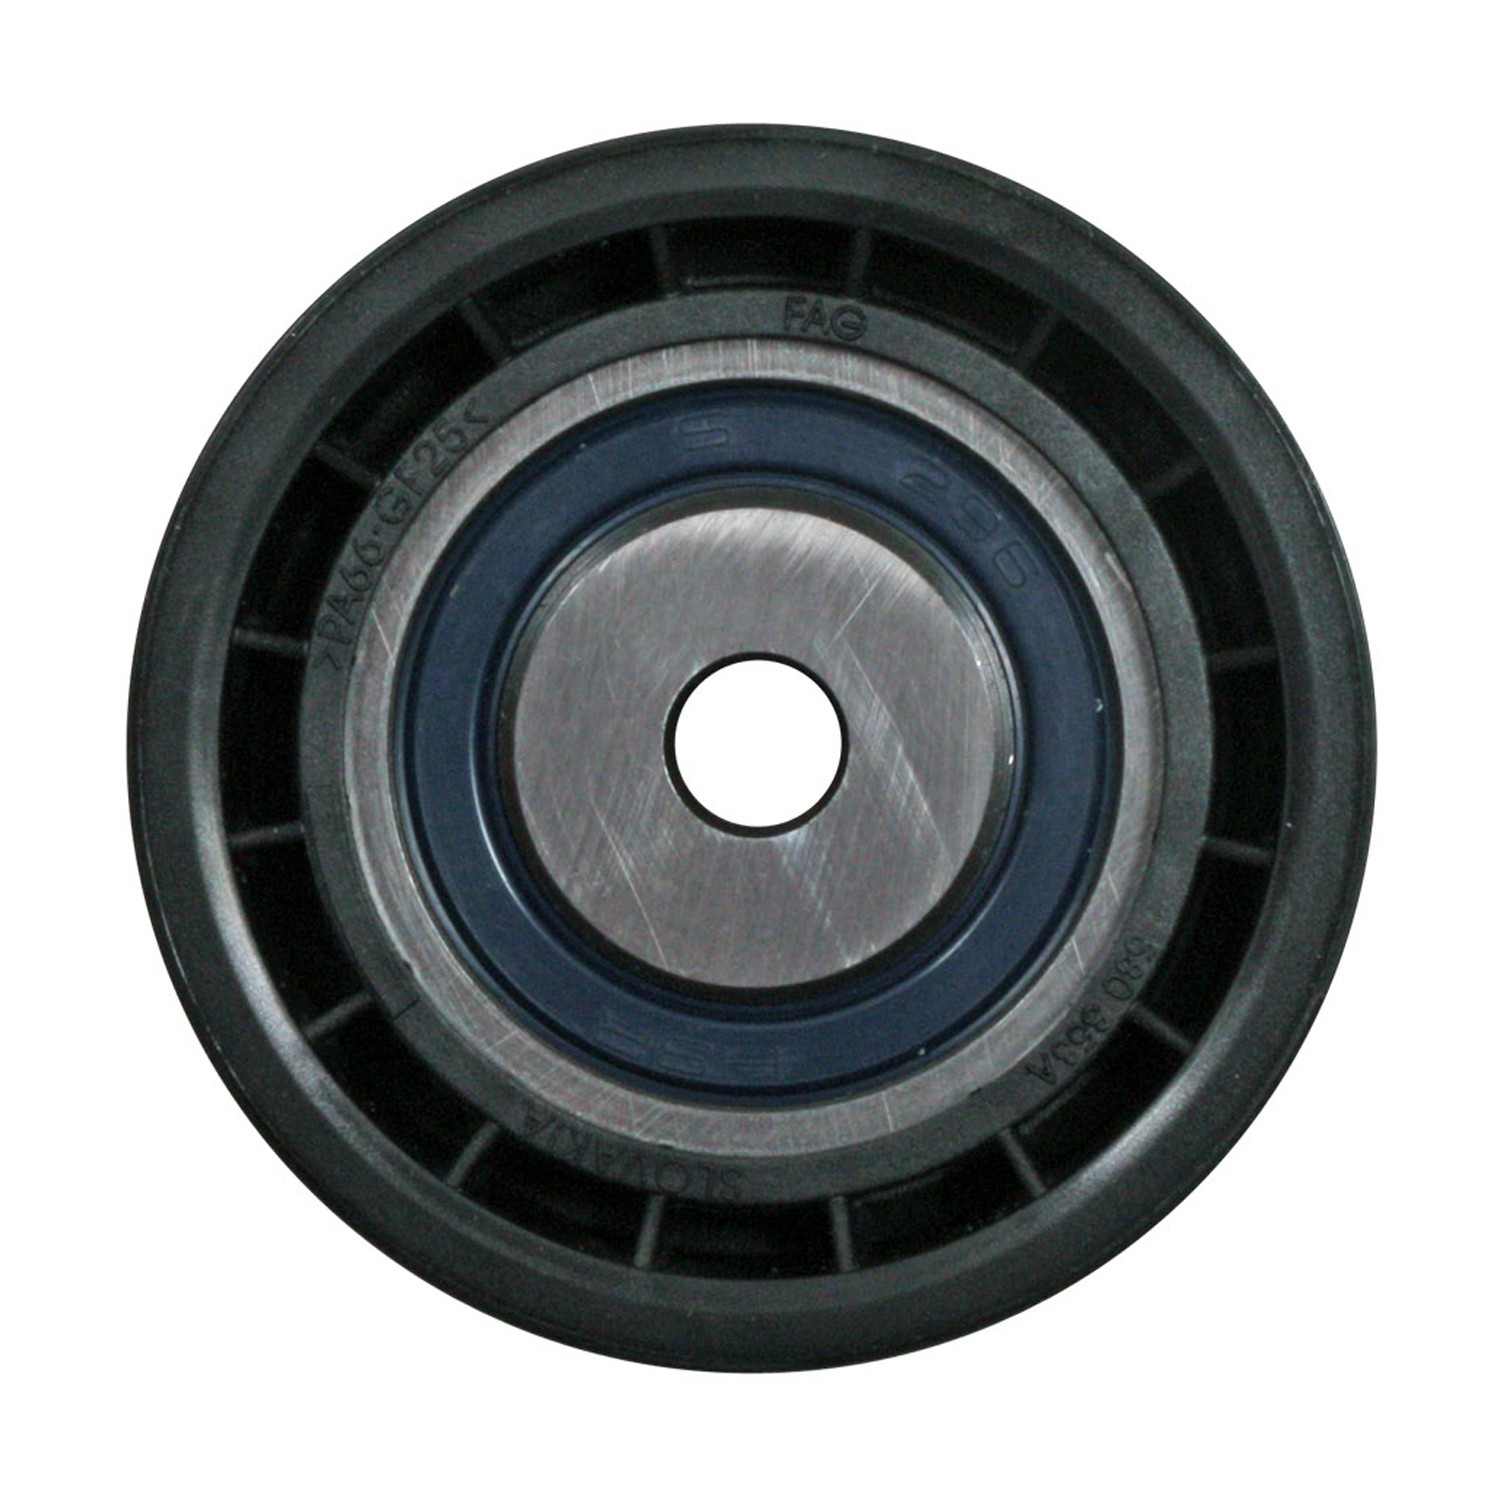 Continental Accessory Drive Belt Pulley 49074